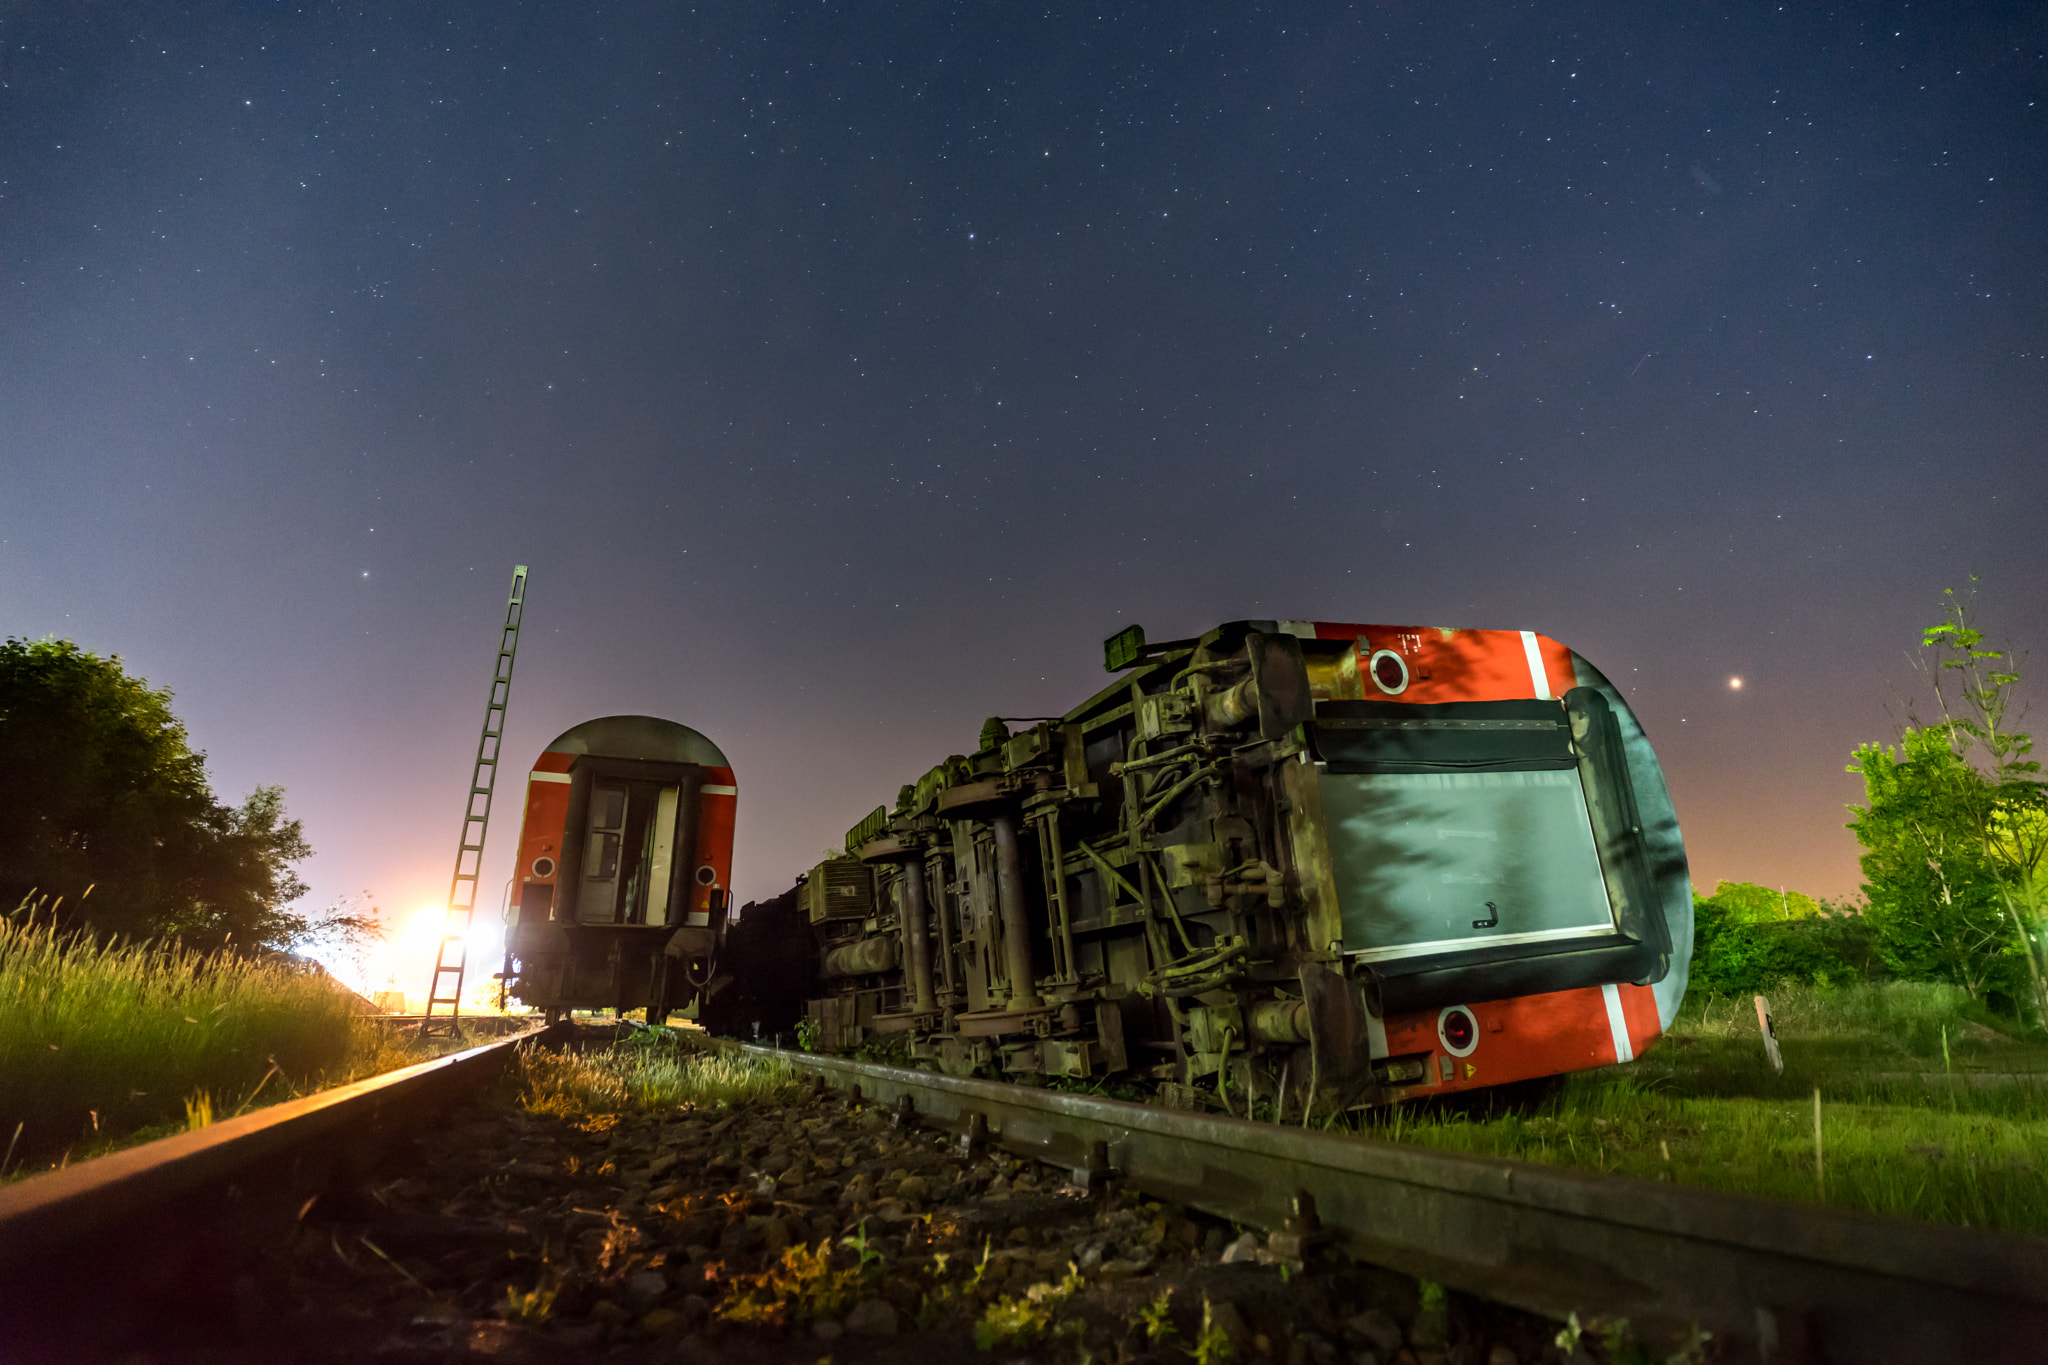 Sony a7 II + ZEISS Batis 18mm F2.8 sample photo. Derailed wagon photography